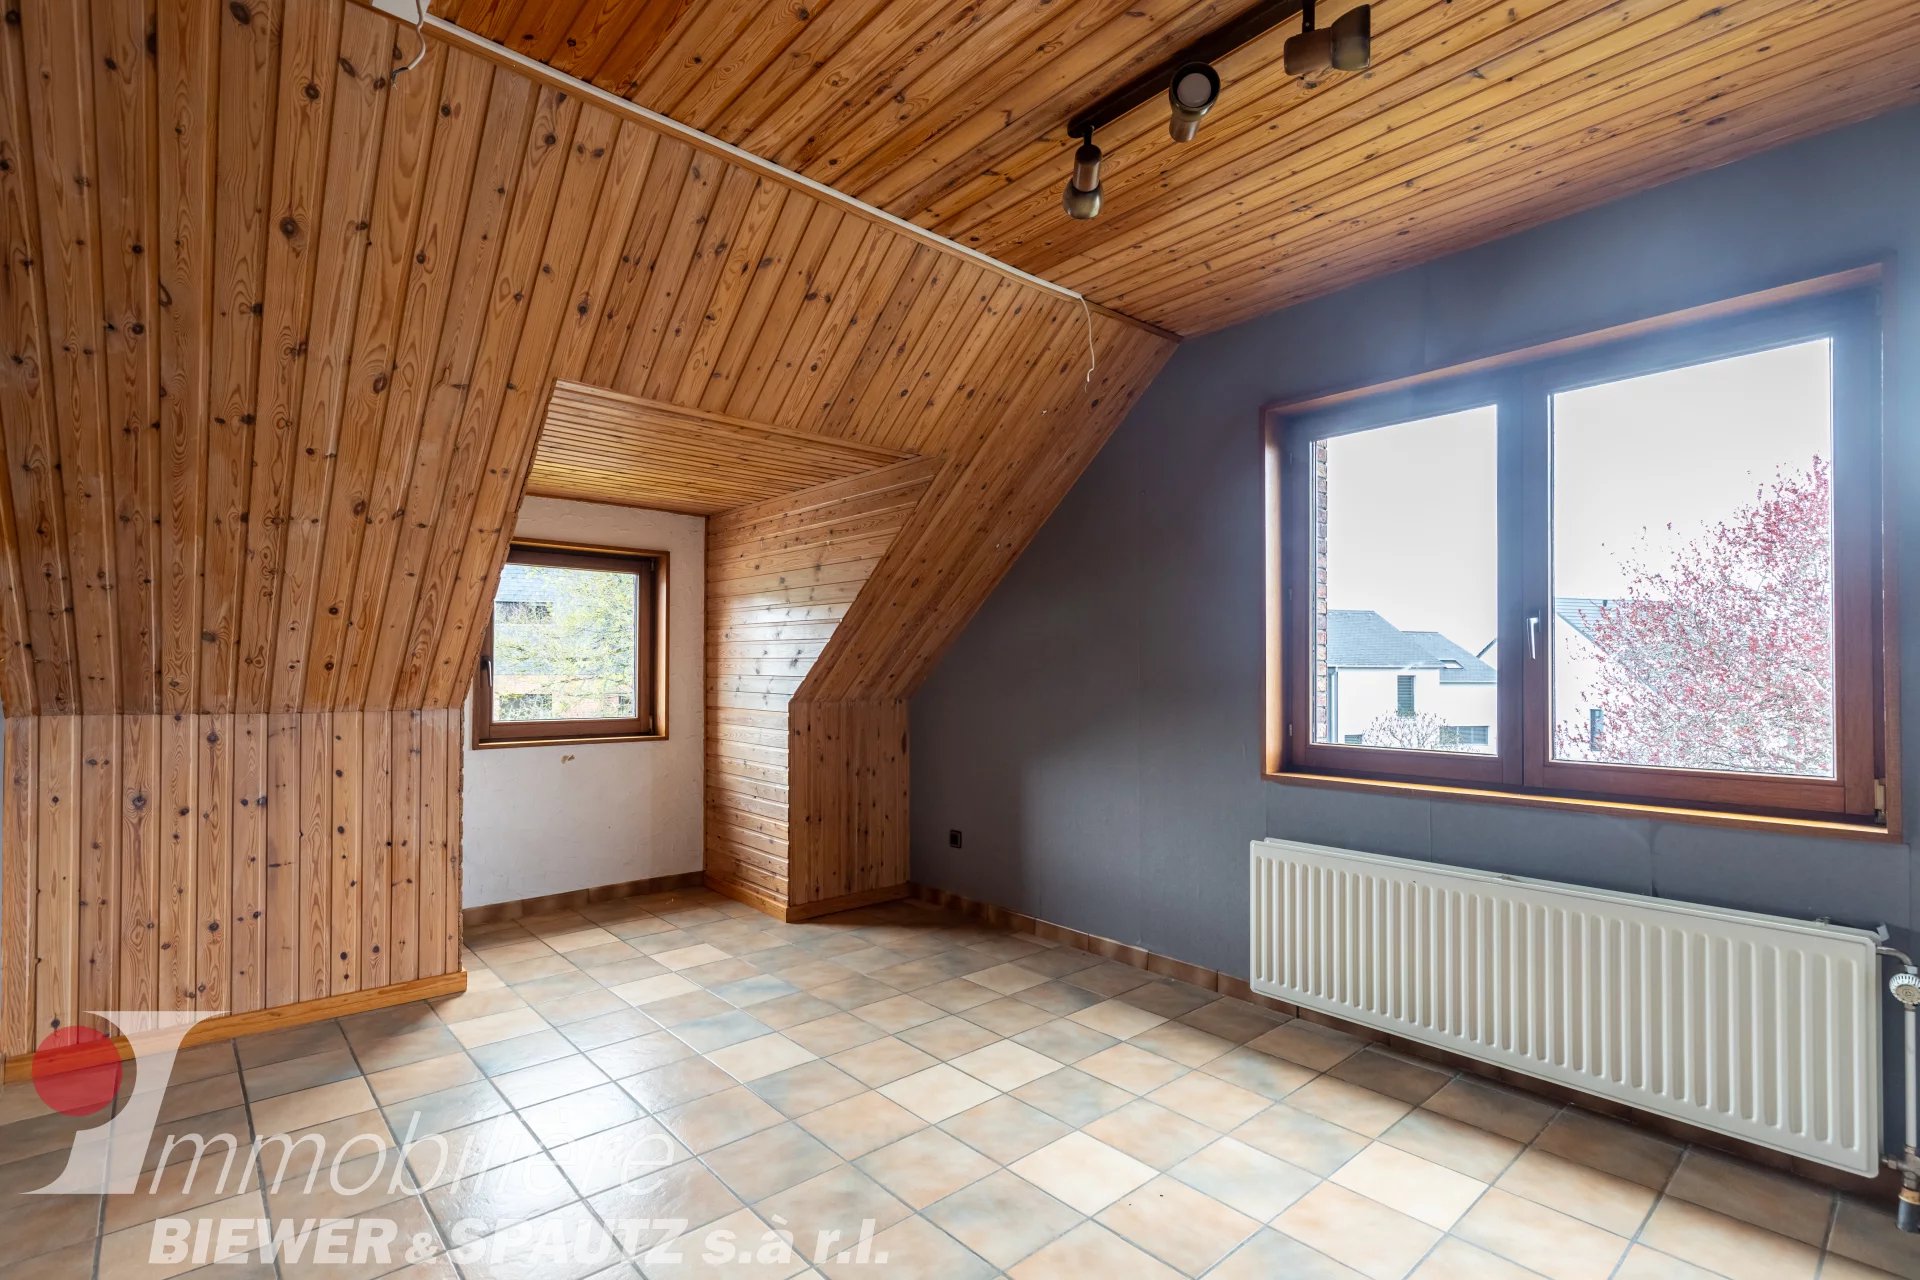 UNDER SALES AGREEMENT - 3 bedroom house in Bourglinster